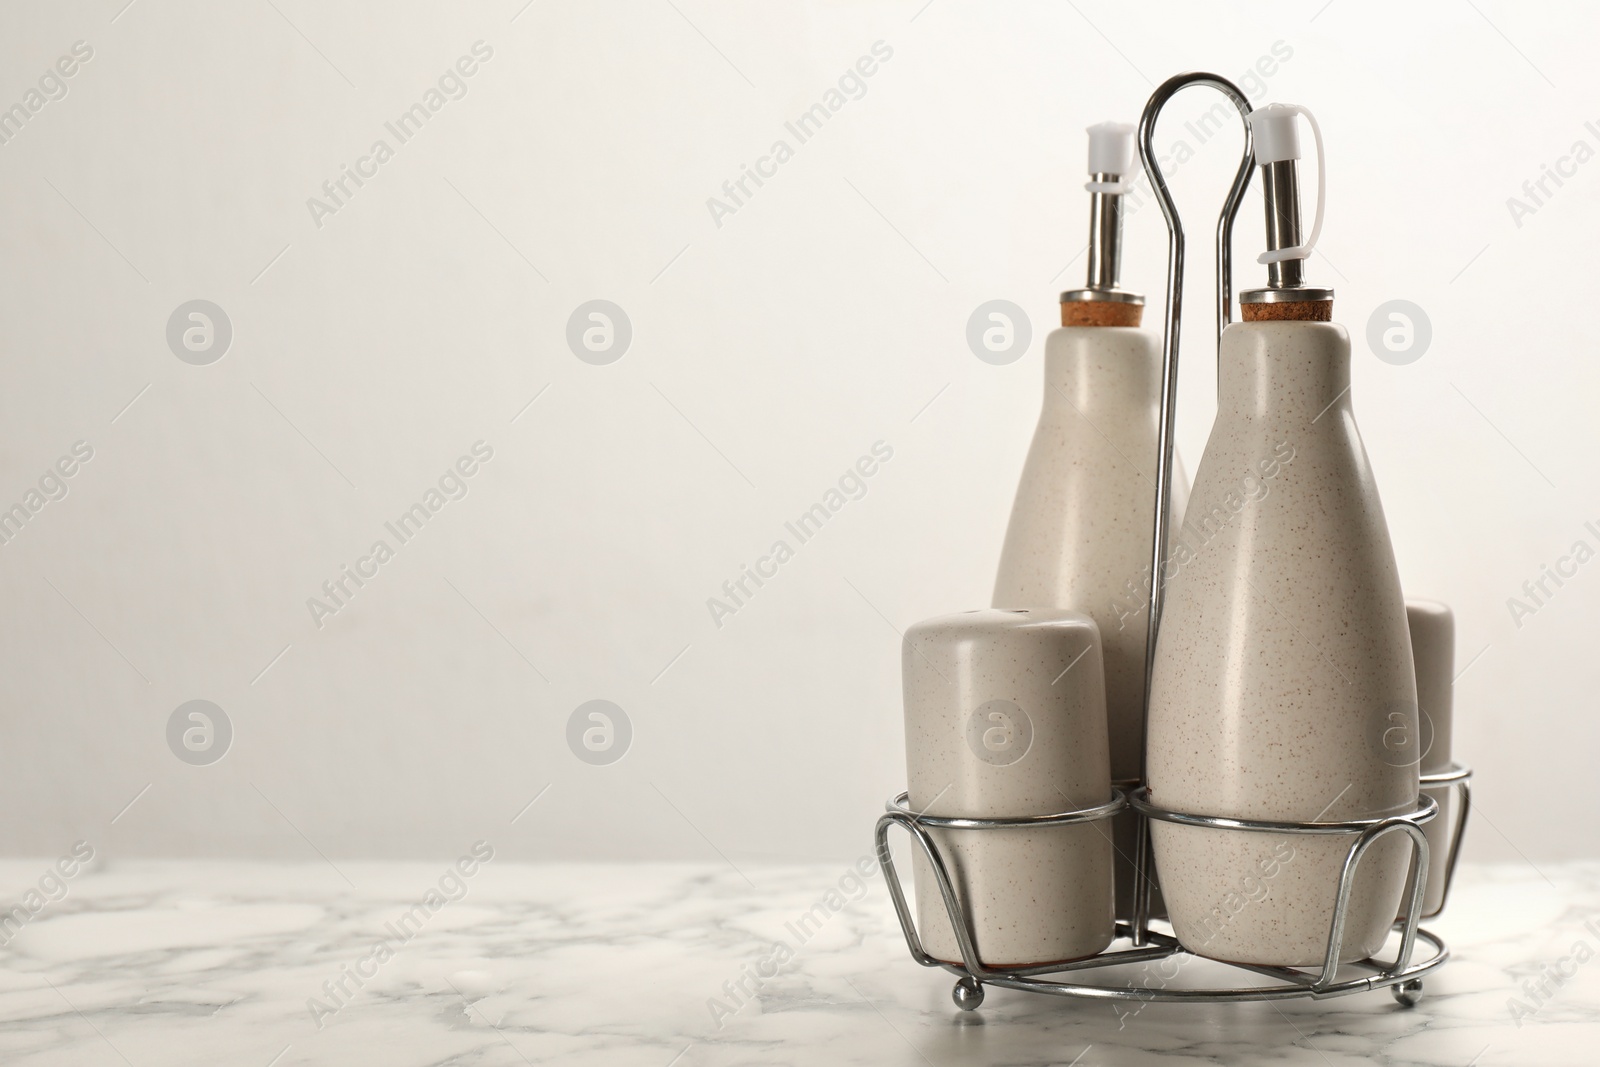 Photo of Sauce bottles with salt and pepper shakers in holder on white marble table. Space for text